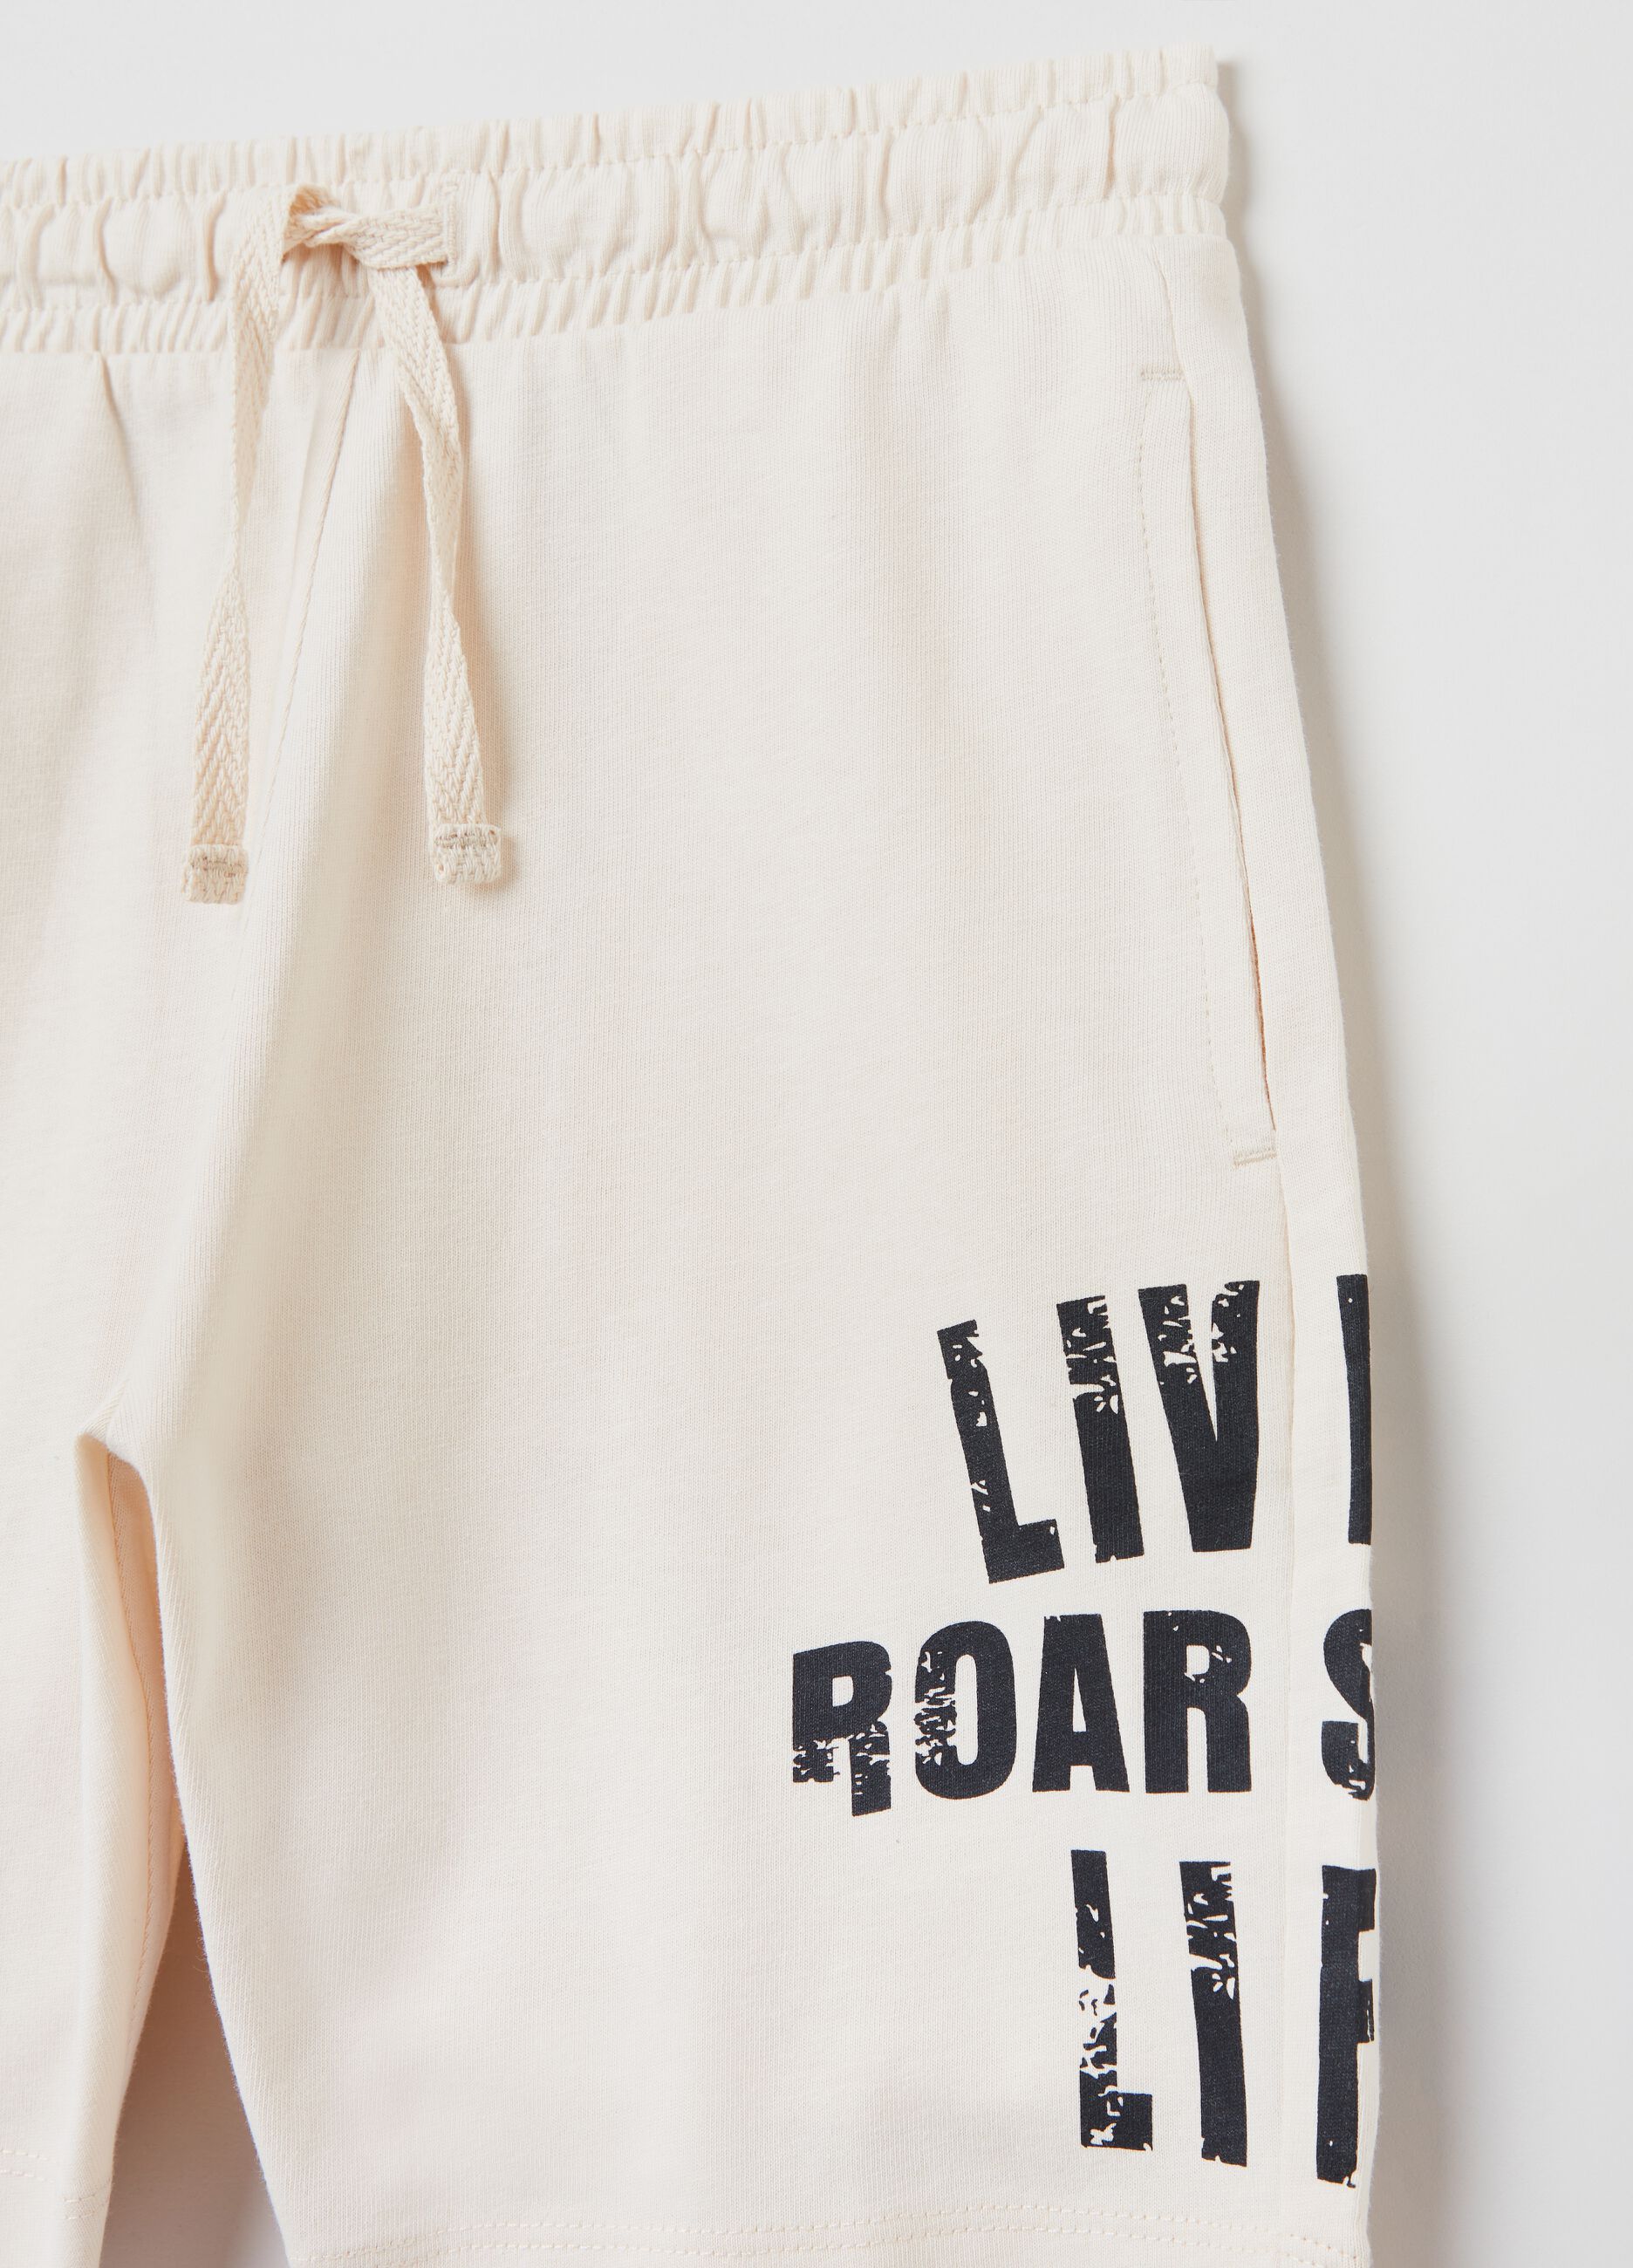 Short with drawstring and lettering print